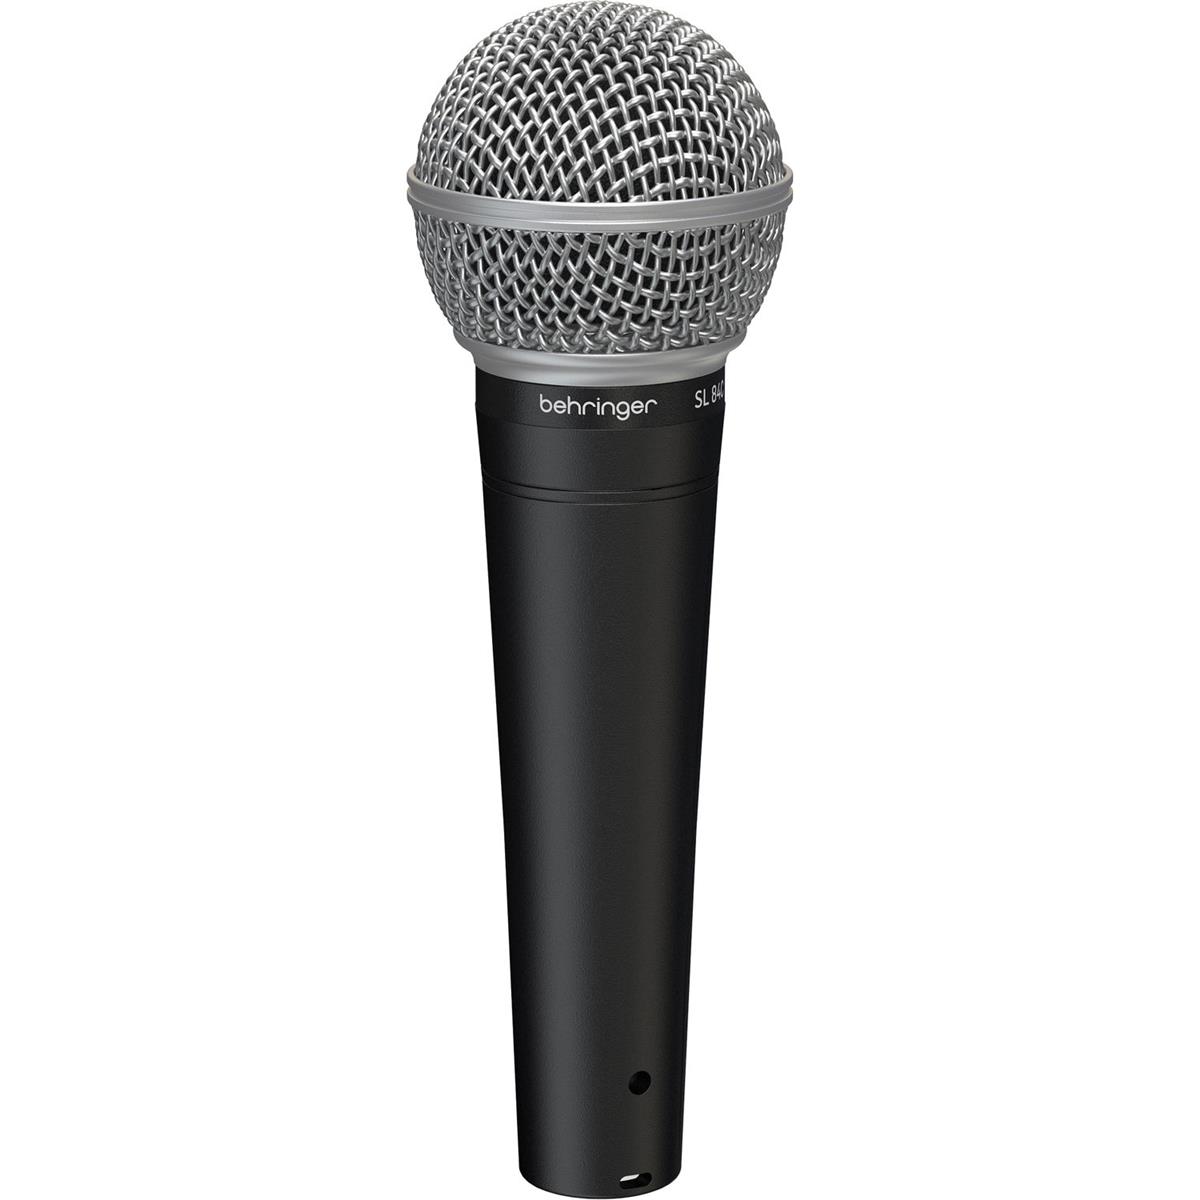 Image of Behringer SL 84C Dynamic Cardioid Microphone